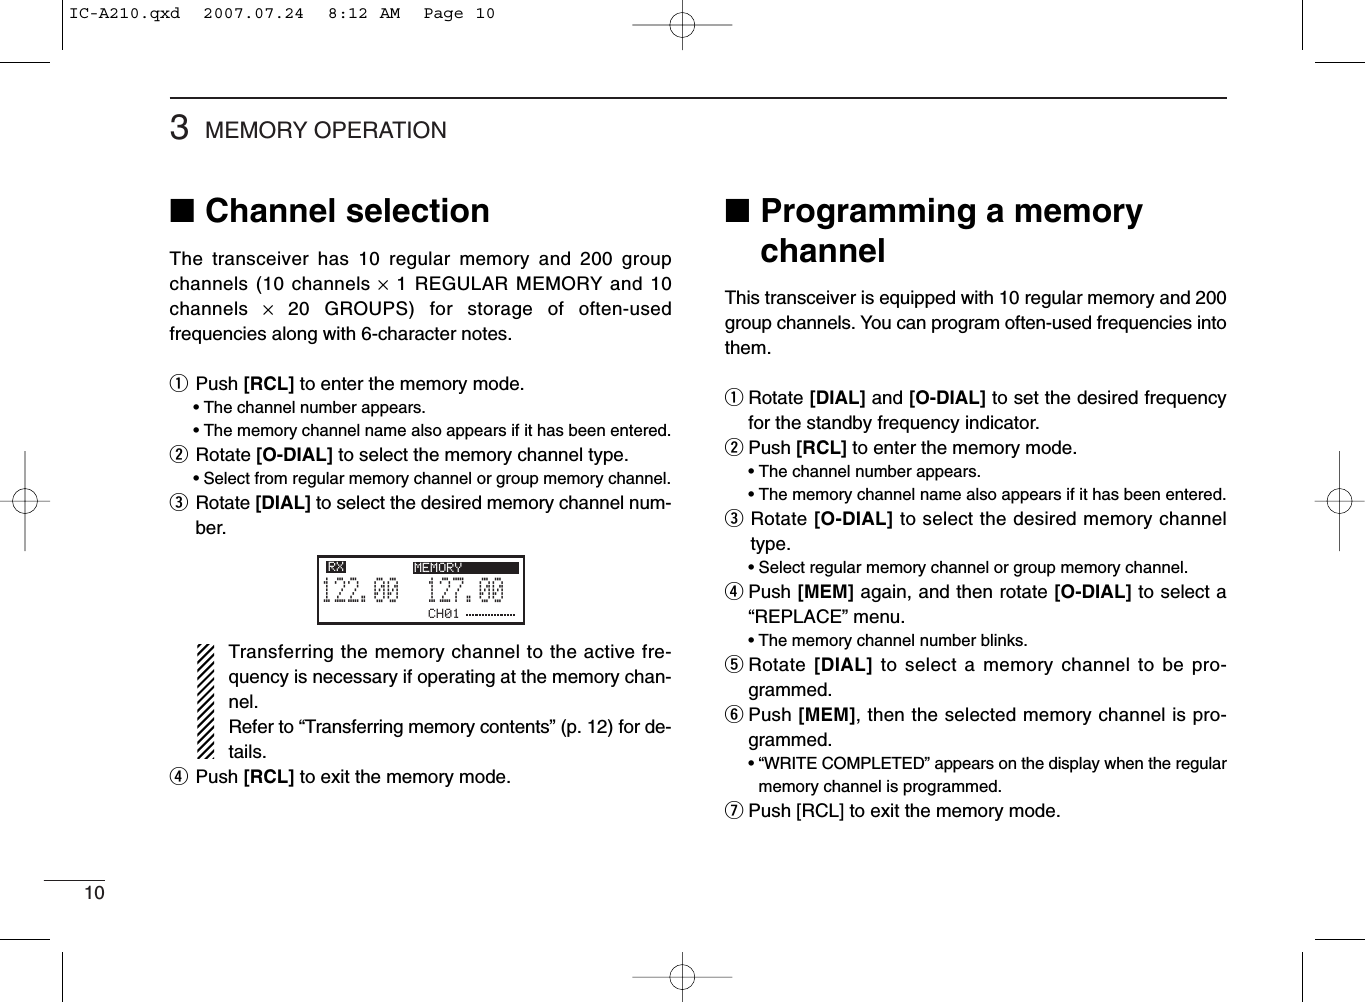 103MEMORY OPERATION■Programming a memorychannelThis transceiver is equipped with 10 regular memory and 200group channels. You can program often-used frequencies intothem.qRotate [DIAL] and [O-DIAL] to set the desired frequencyfor the standby frequency indicator.wPush [RCL] to enter the memory mode.• The channel number appears.• The memory channel name also appears if it has been entered.eRotate [O-DIAL] to select the desired memory channeltype.• Select regular memory channel or group memory channel.rPush [MEM] again, and then rotate [O-DIAL] to select a“REPLACE” menu.• The memory channel number blinks.tRotate [DIAL] to select a memory channel to be pro-grammed.yPush [MEM], then the selected memory channel is pro-grammed.• “WRITE COMPLETED” appears on the display when the regularmemory channel is programmed.uPush [RCL] to exit the memory mode.■Channel selectionThe transceiver has 10 regular memory and 200 groupchannels (10 channels ×1 REGULAR MEMORY and 10channels  ×20 GROUPS) for storage of often-usedfrequencies along with 6-character notes.qPush [RCL] to enter the memory mode.• The channel number appears.• The memory channel name also appears if it has been entered.wRotate [O-DIAL] to select the memory channel type.• Select from regular memory channel or group memory channel.eRotate [DIAL] to select the desired memory channel num-ber.Transferring the memory channel to the active fre-quency is necessary if operating at the memory chan-nel.Refer to “Transferring memory contents” (p. 12) for de-tails.rPush [RCL] to exit the memory mode.CH01127.005122.00RX MEMORYIC-A210.qxd  2007.07.24  8:12 AM  Page 10